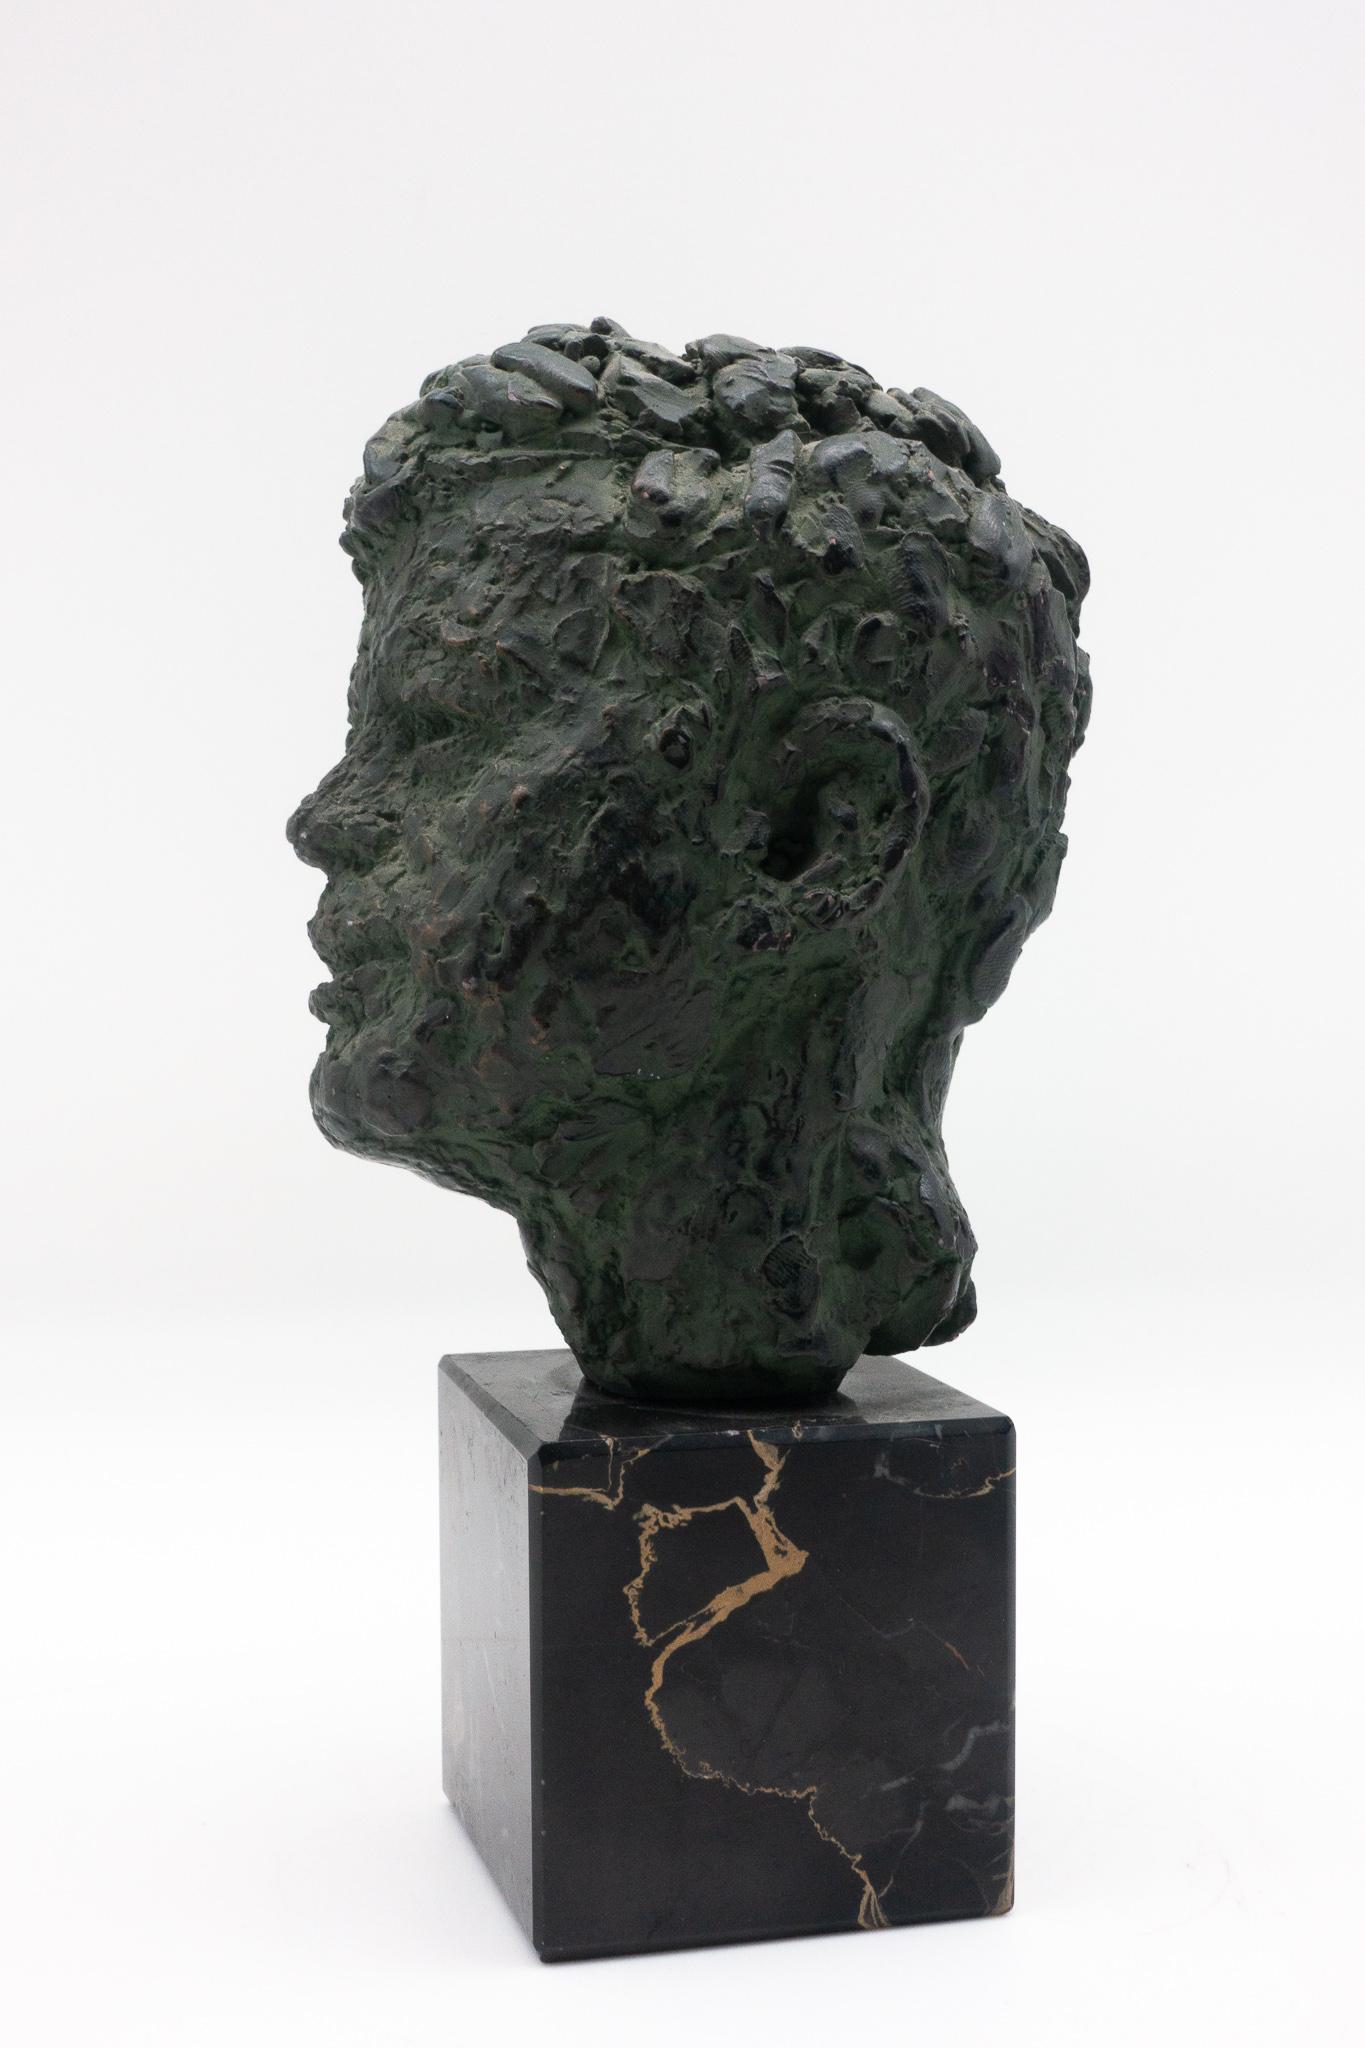 Bust of former President John Fitzgerald Kennedy made of bronze-patinated plaster on a marble base by Robert Berks, American sculptor (1922-2011).
This is an edition of one of the artist's most important works; the larger original version can be